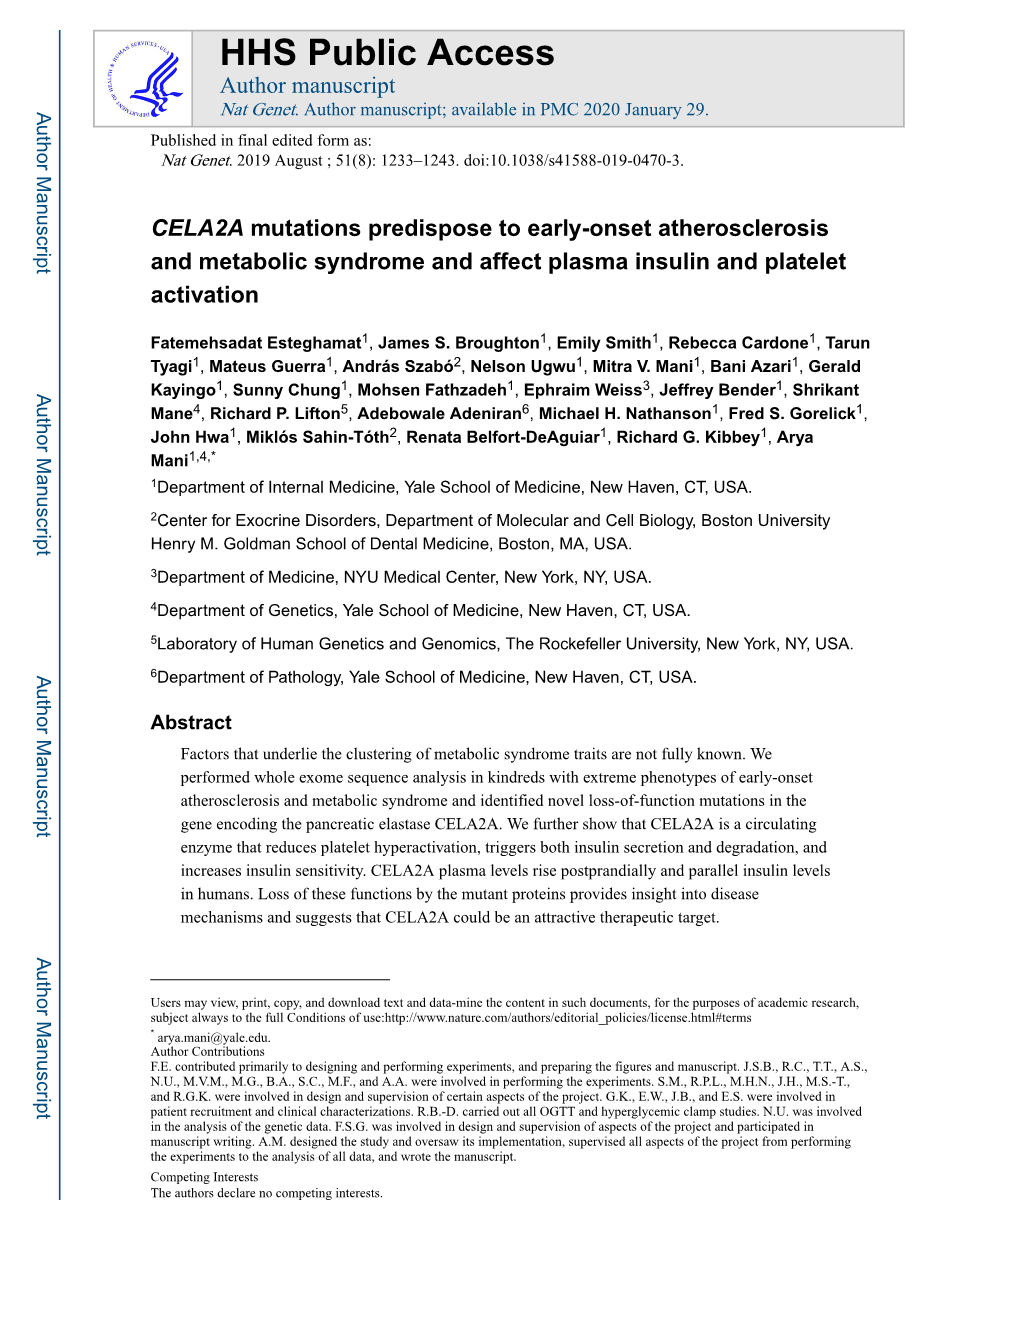 CELA2A Mutations Predispose to Early-Onset Atherosclerosis and Metabolic Syndrome and Affect Plasma Insulin and Platelet Activation